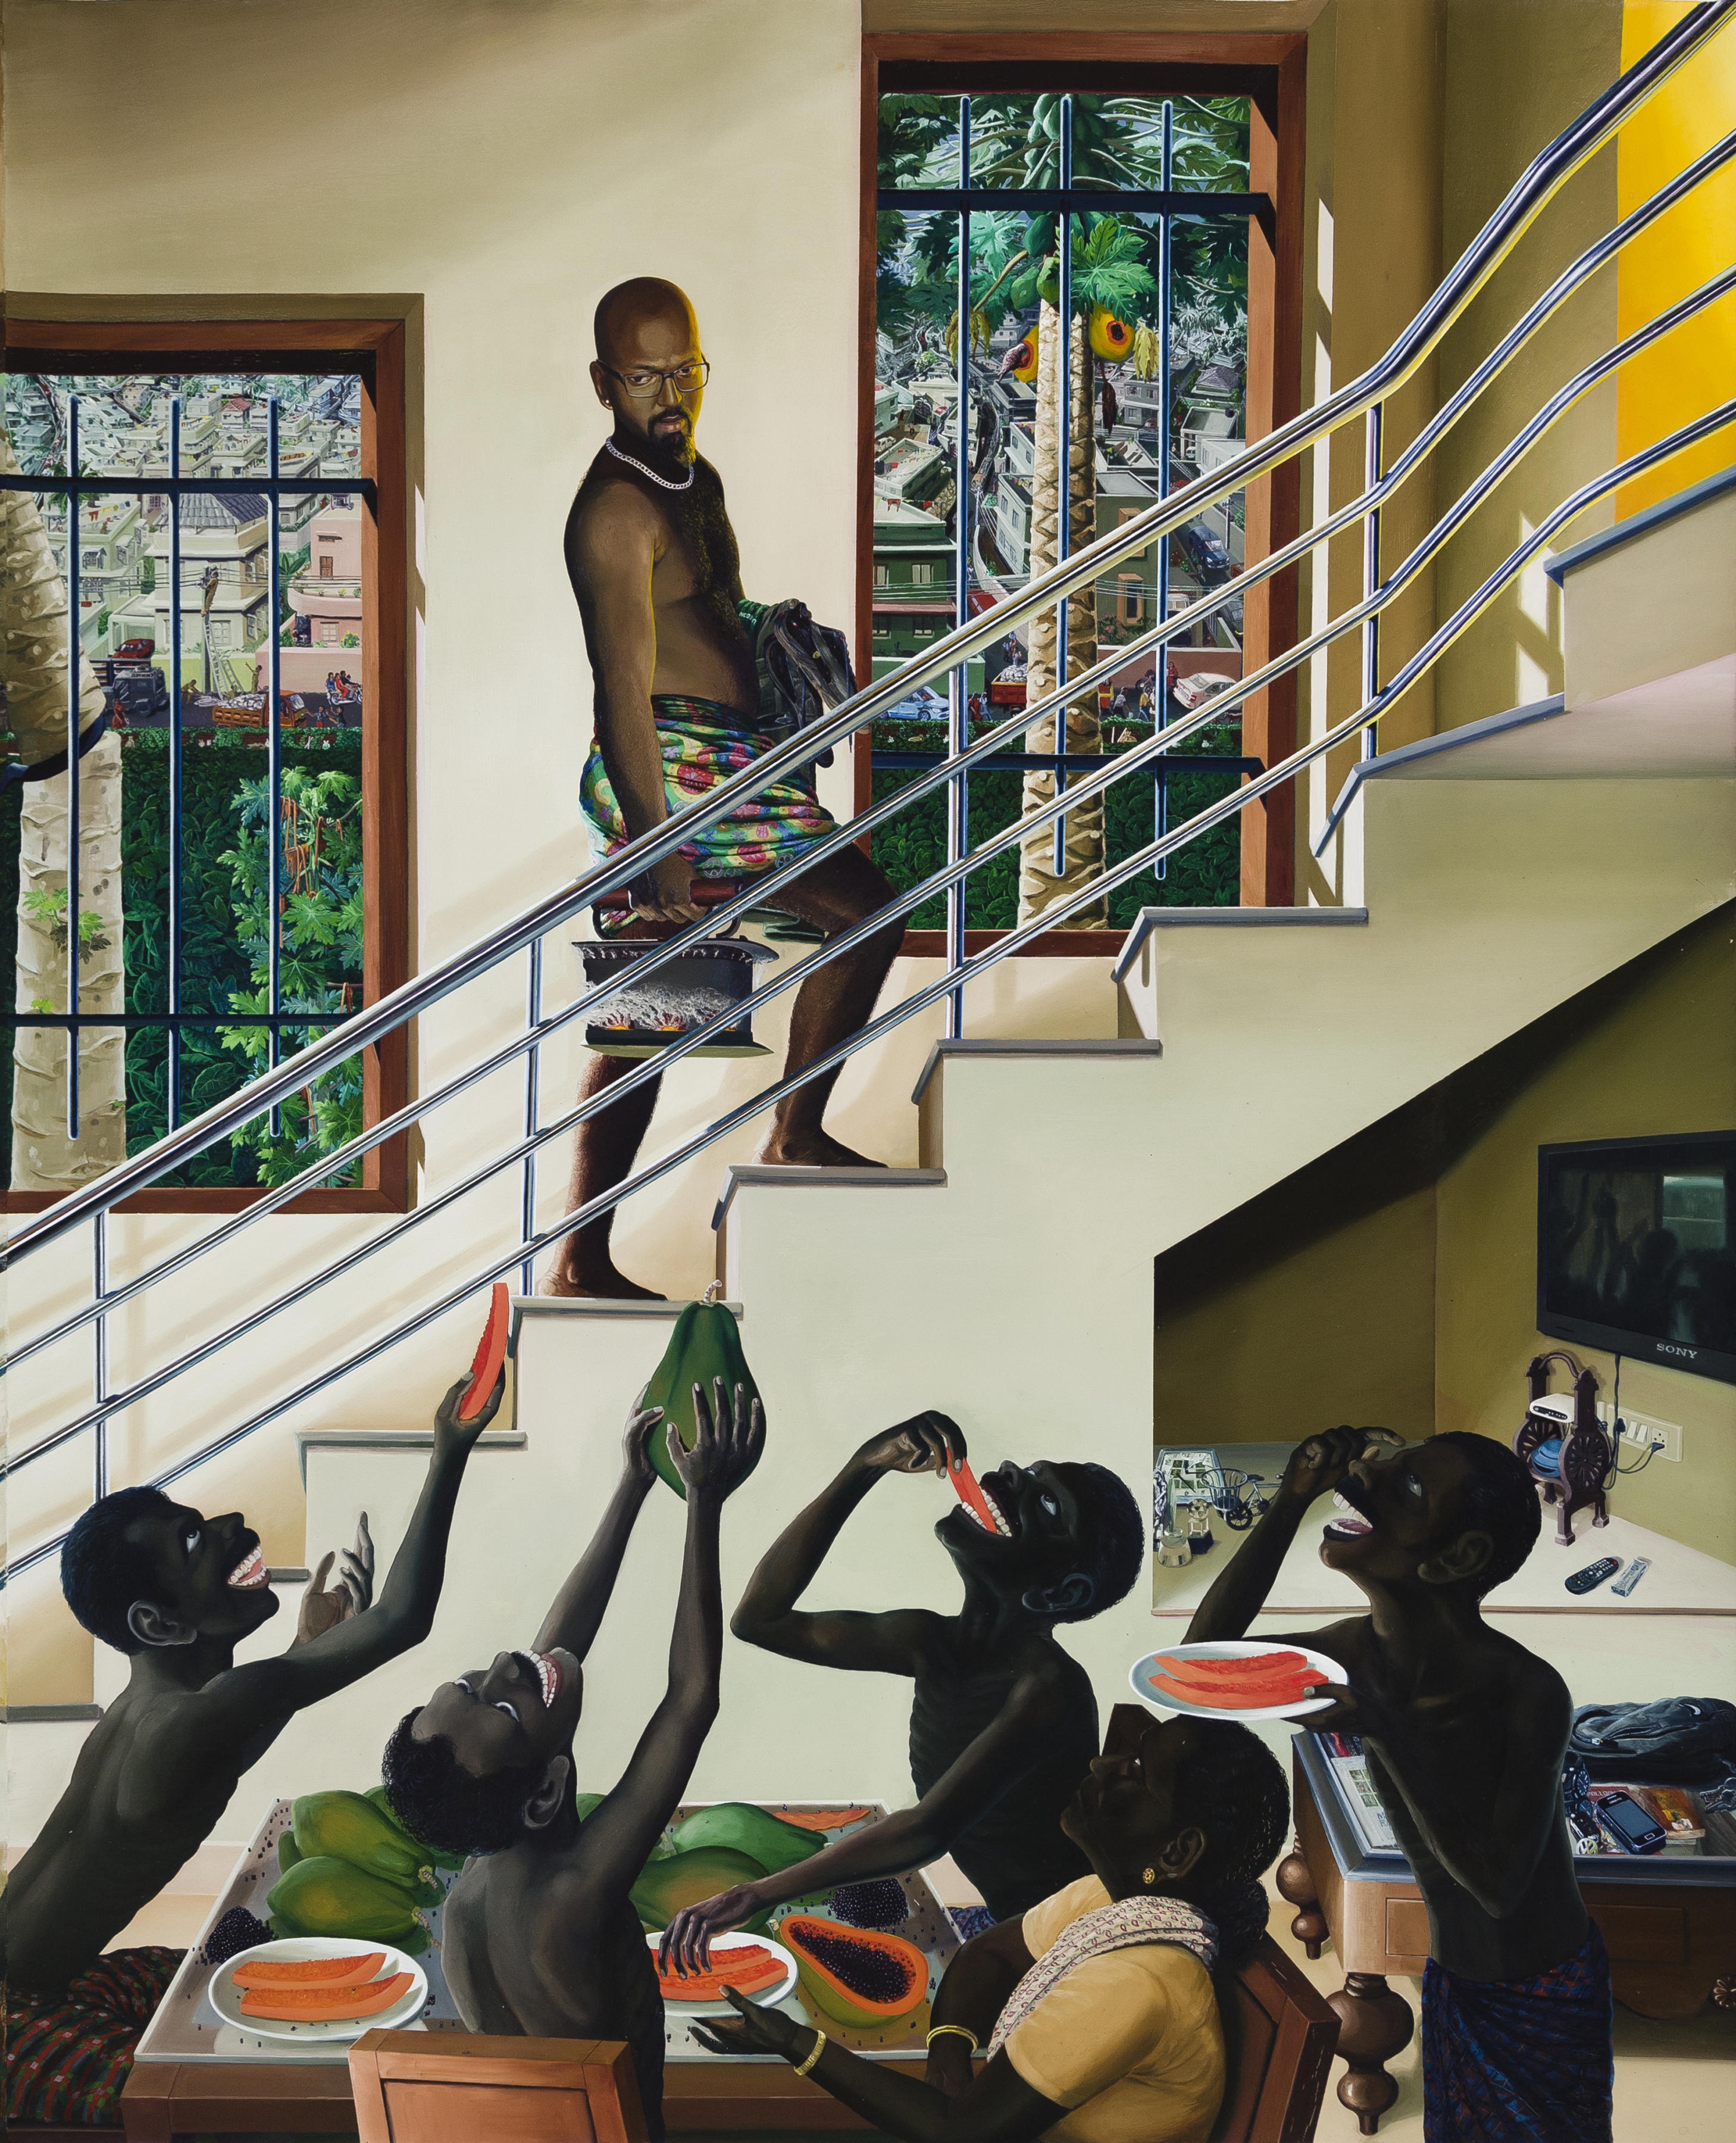 The Middle Step, 2014

Oil on canvas

96 x 77.9 in /&amp;nbsp;&amp;nbsp;244 x 198 cm

Collection: Fukuoka Asian Art Museum, Japan